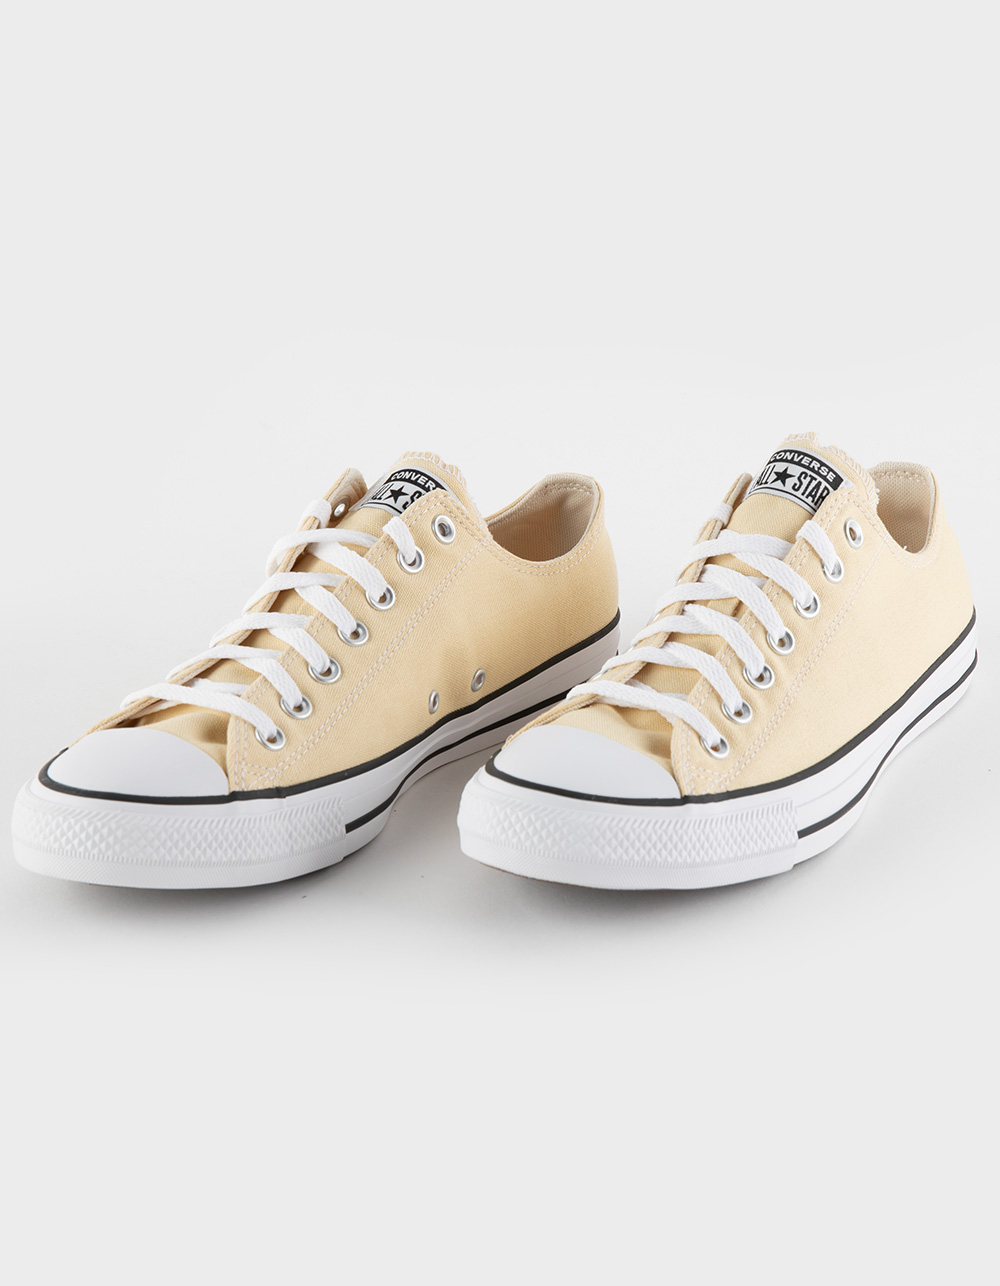 CONVERSE Chuck Taylor All Star Low Top Shoes